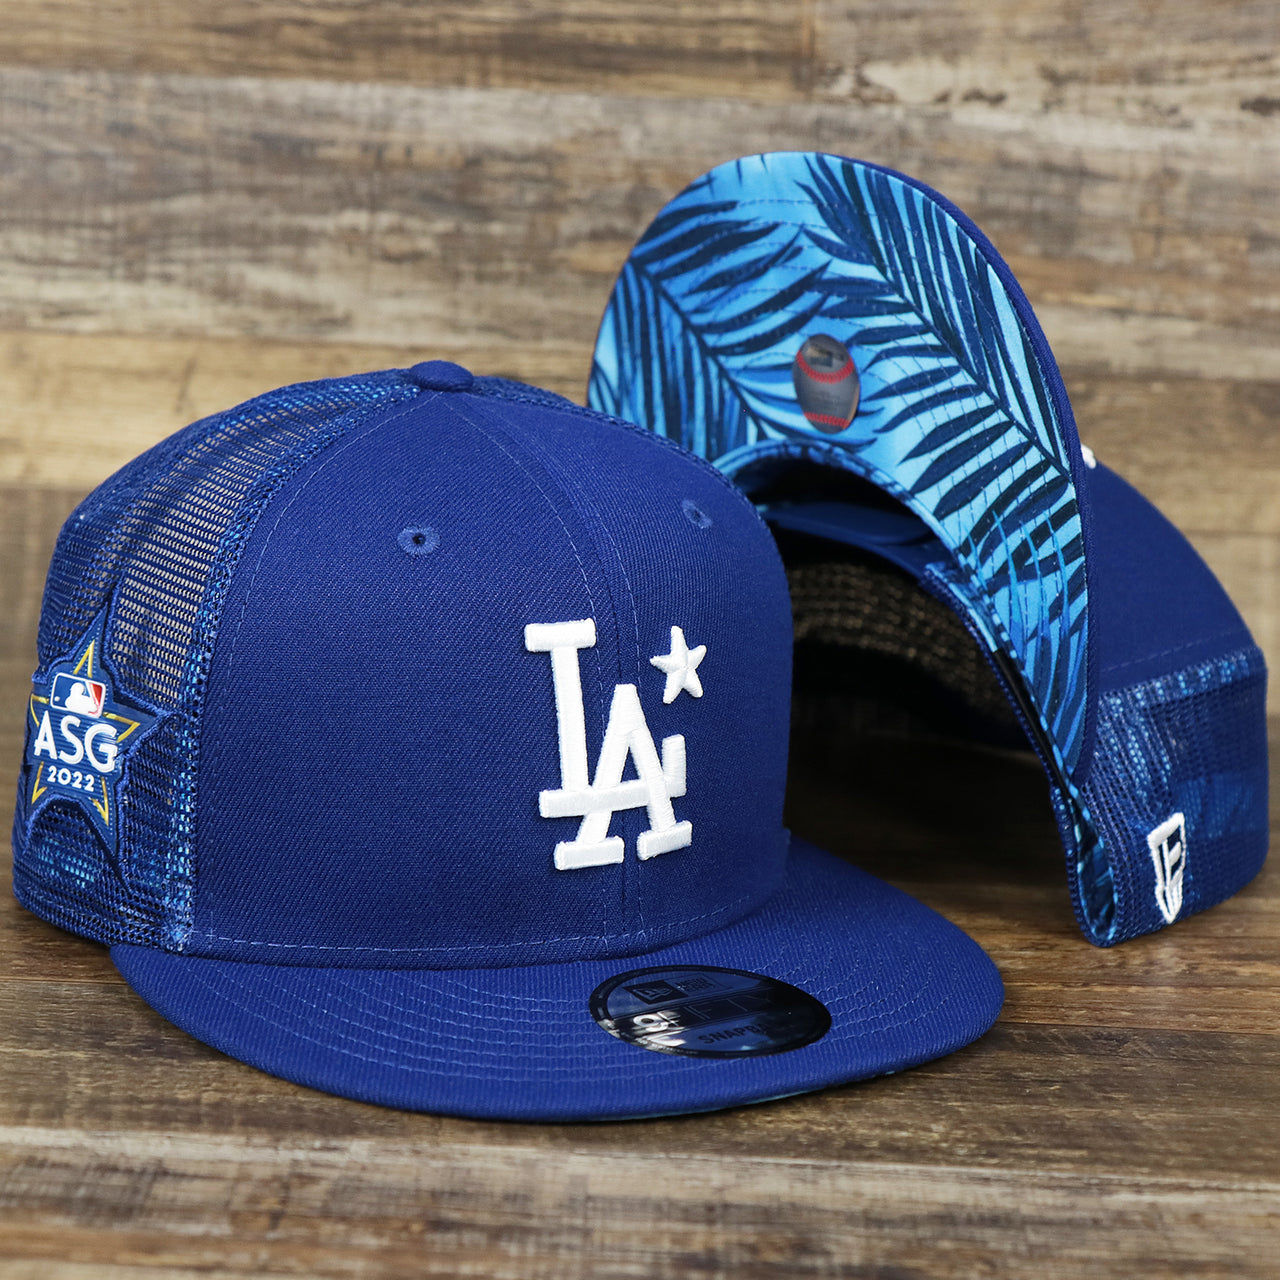 The Los Angeles Dodgers Metallic All Star Game MLB 2022 Side Patch 9Fifty Mesh Snapback | ASG 2022 Royal Blue Trucker Hat